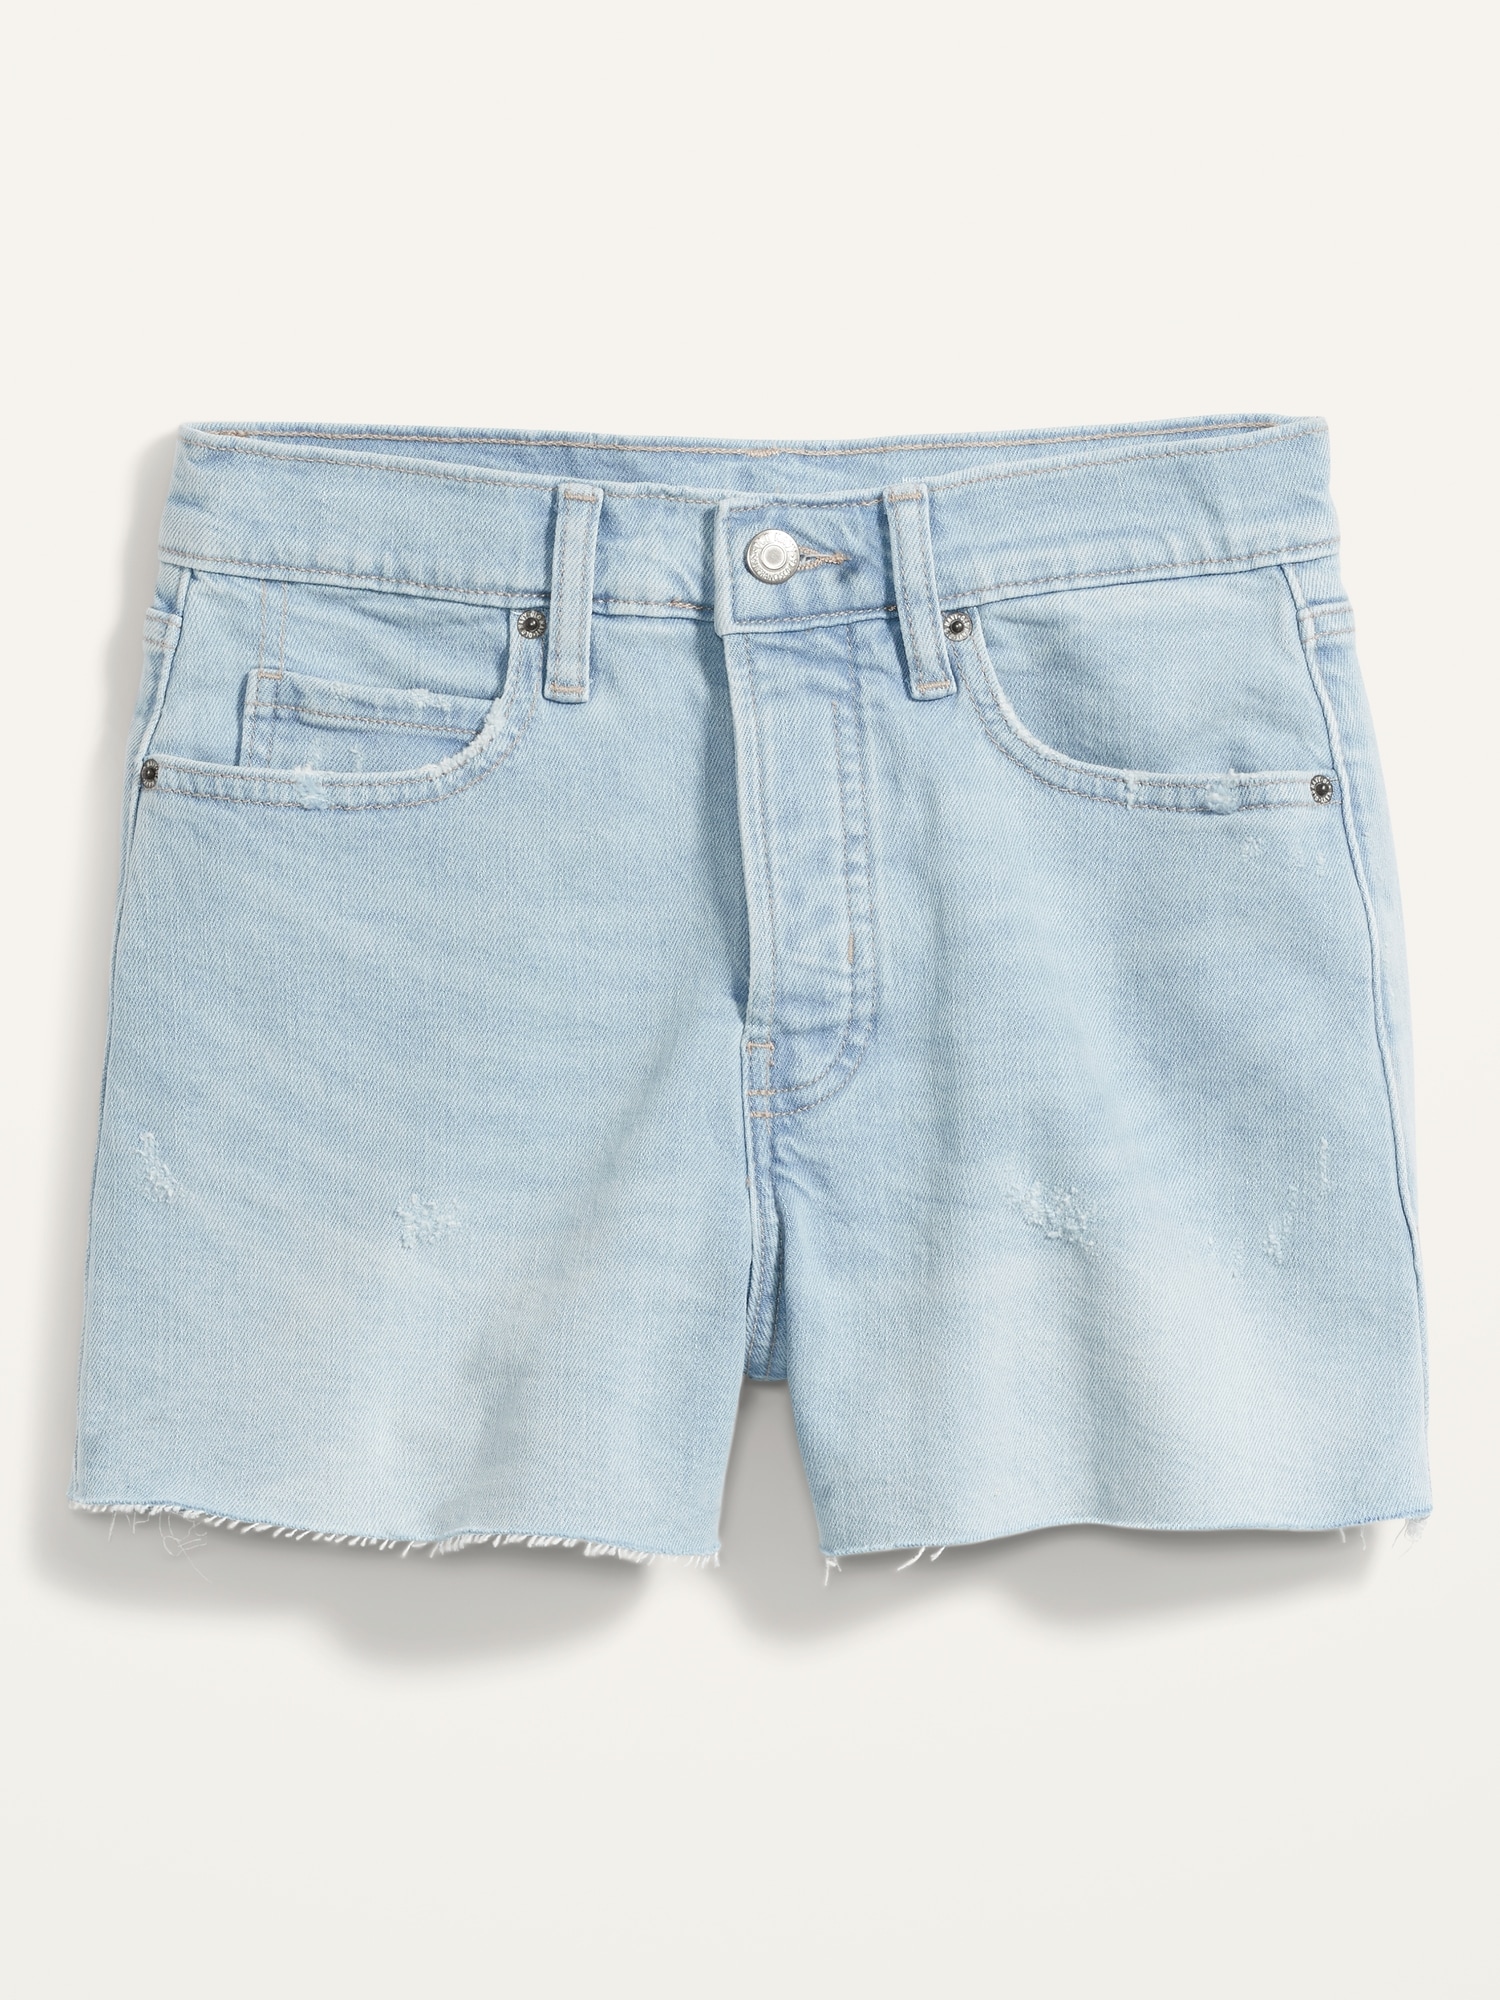 High-Waisted Button-Fly OG Straight Jean Shorts -- 3-inch inseam | Old Navy